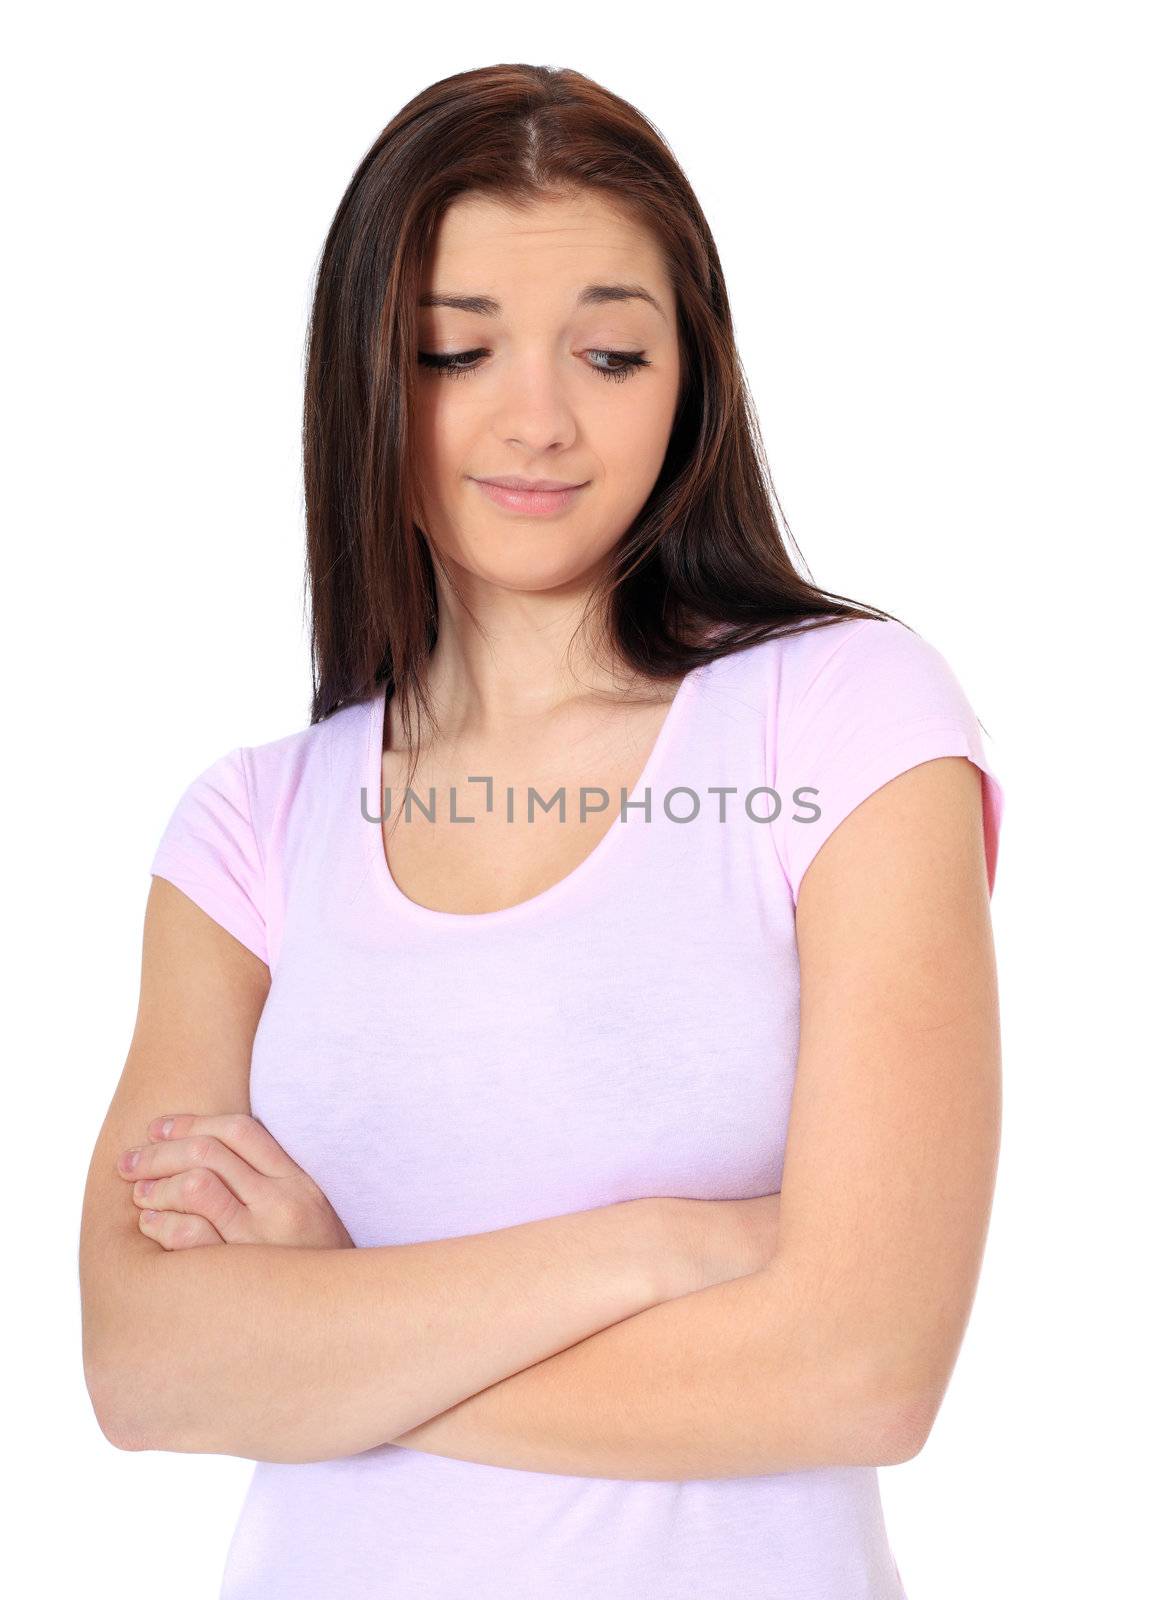 Attractive teenage girl with doubtful look. All on white background.